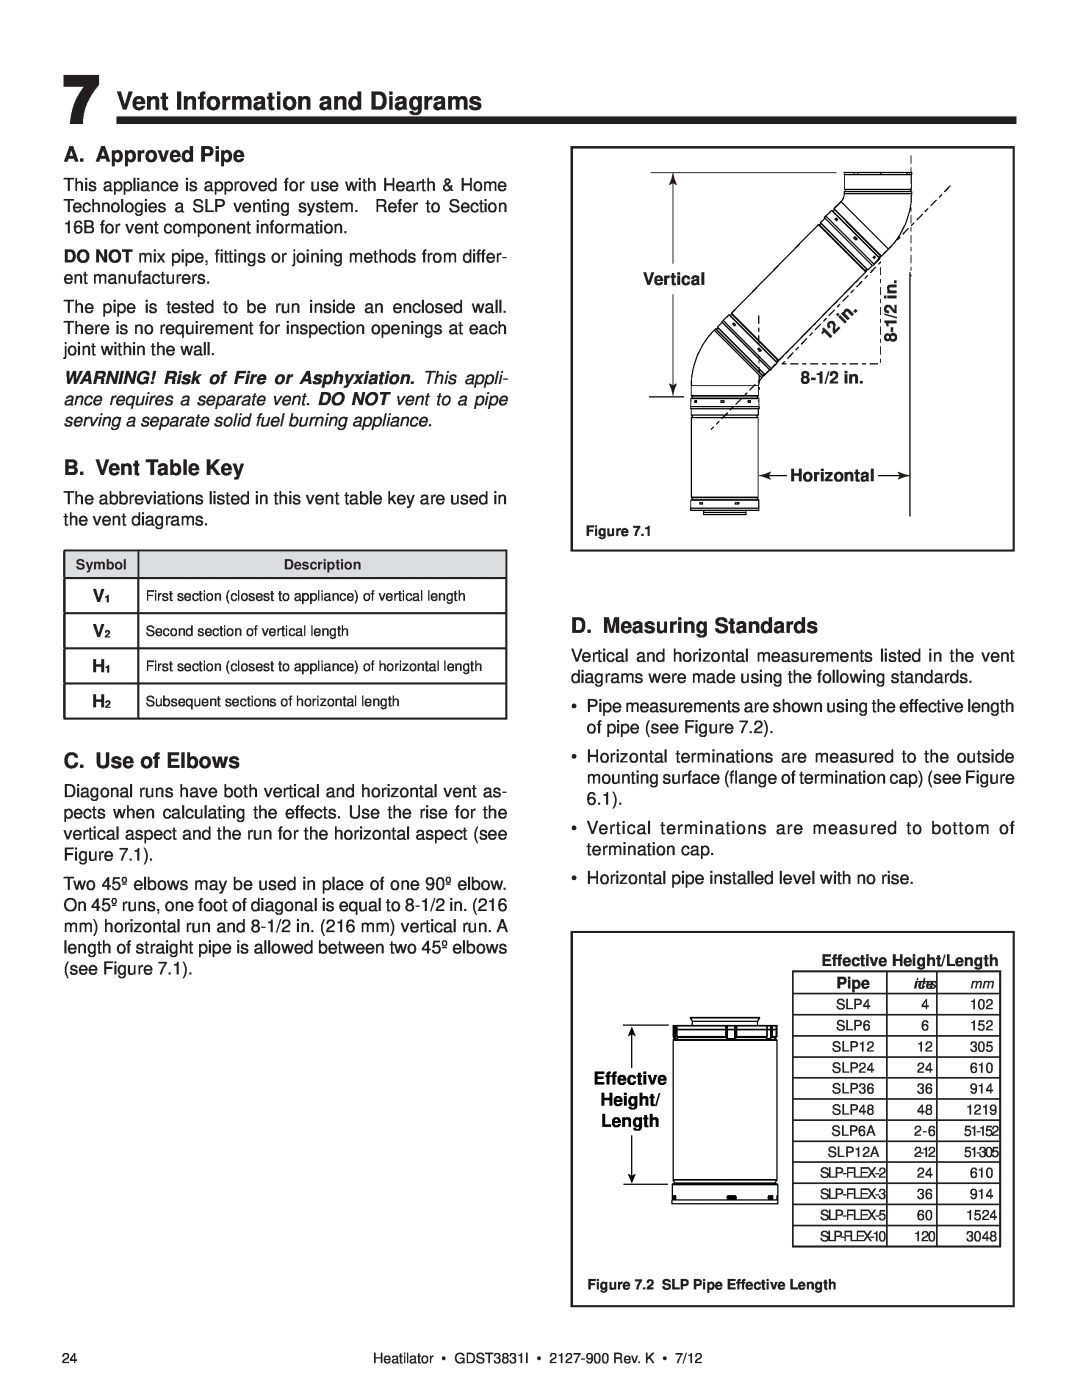 Heatiator GDST3831I Vent Information and Diagrams, A. Approved Pipe, B. Vent Table Key, C. Use of Elbows, Effective 